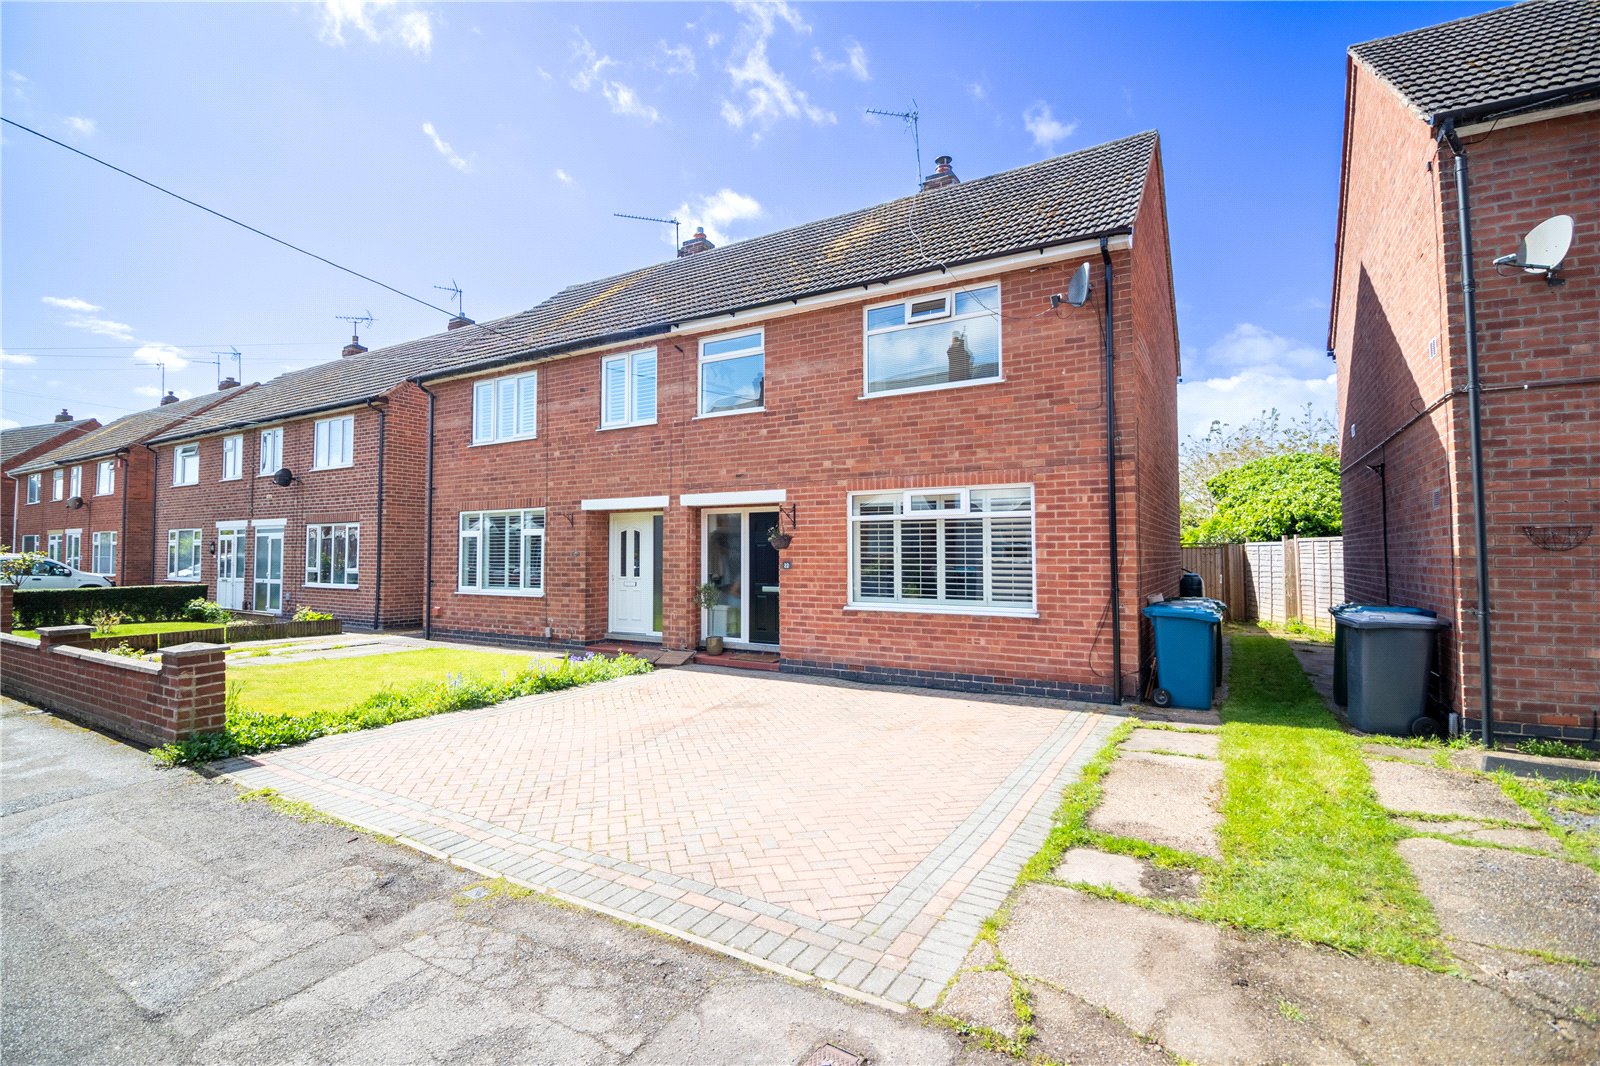 3 bed house for sale in Exchange Road, West Bridgford  - Property Image 1